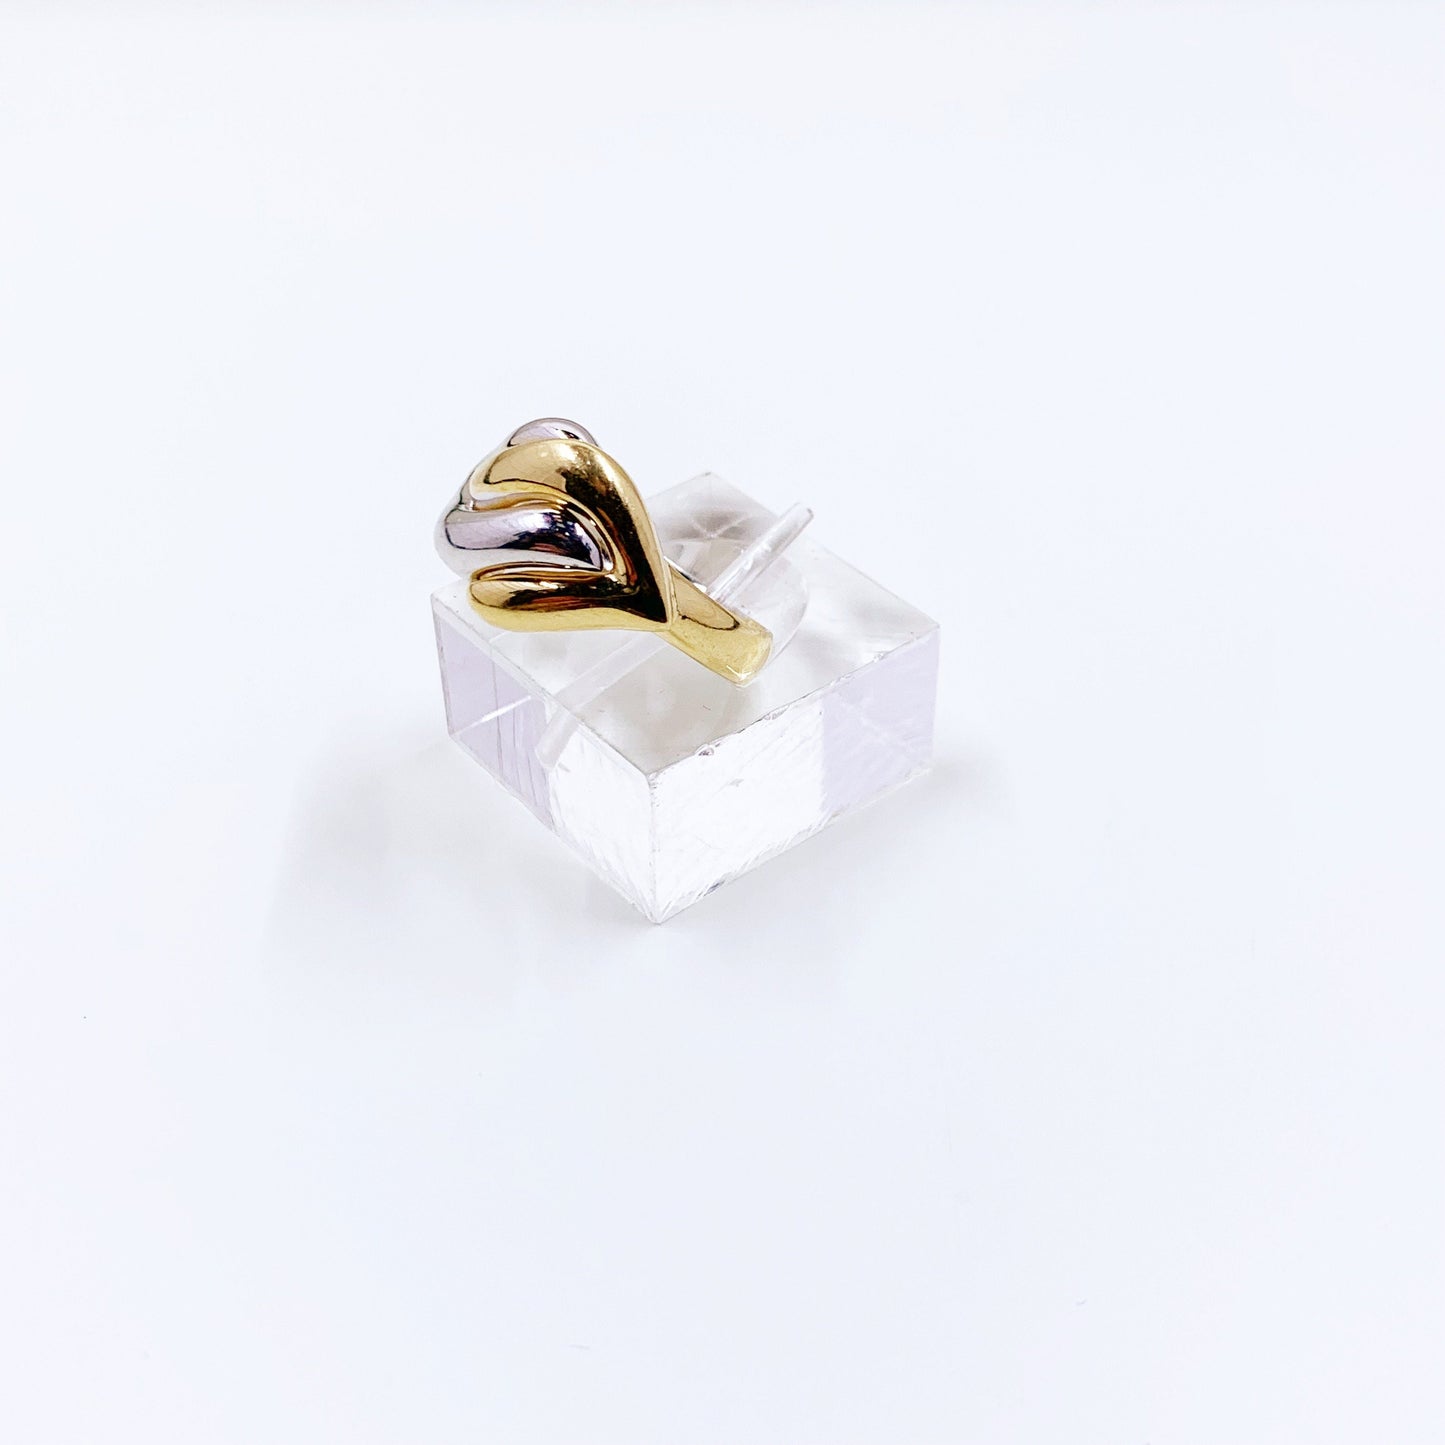 Vintage Italian 18K Two Tone Gold Ring | 18K White and Yellow Gold Knot Ring | Size 7 1/4 Ring